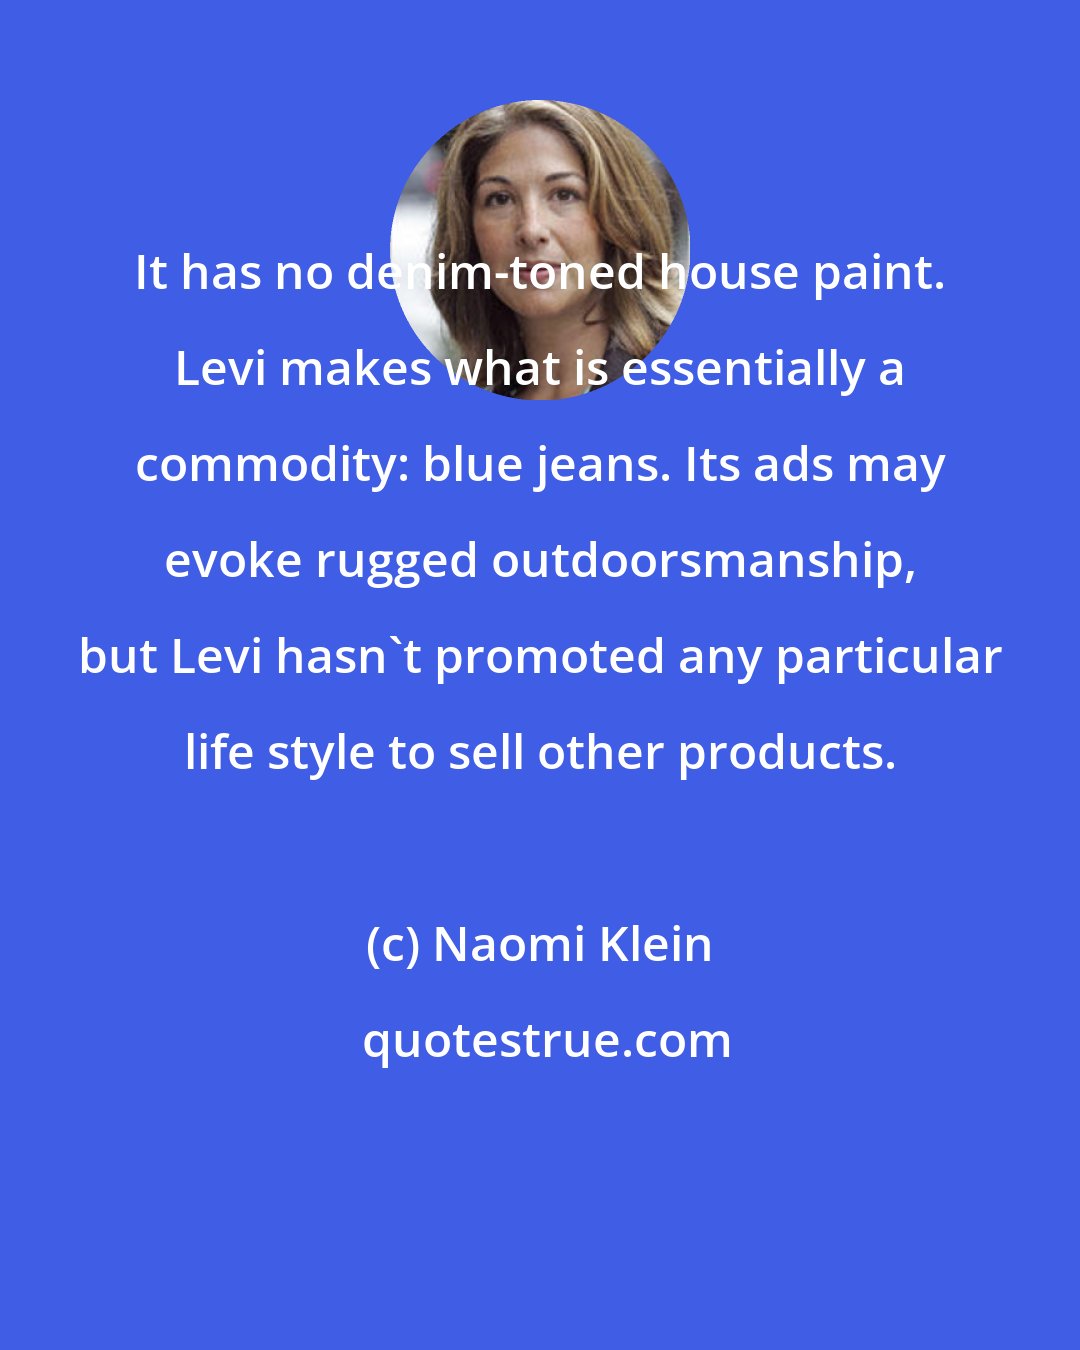 Naomi Klein: It has no denim-toned house paint. Levi makes what is essentially a commodity: blue jeans. Its ads may evoke rugged outdoorsmanship, but Levi hasn't promoted any particular life style to sell other products.